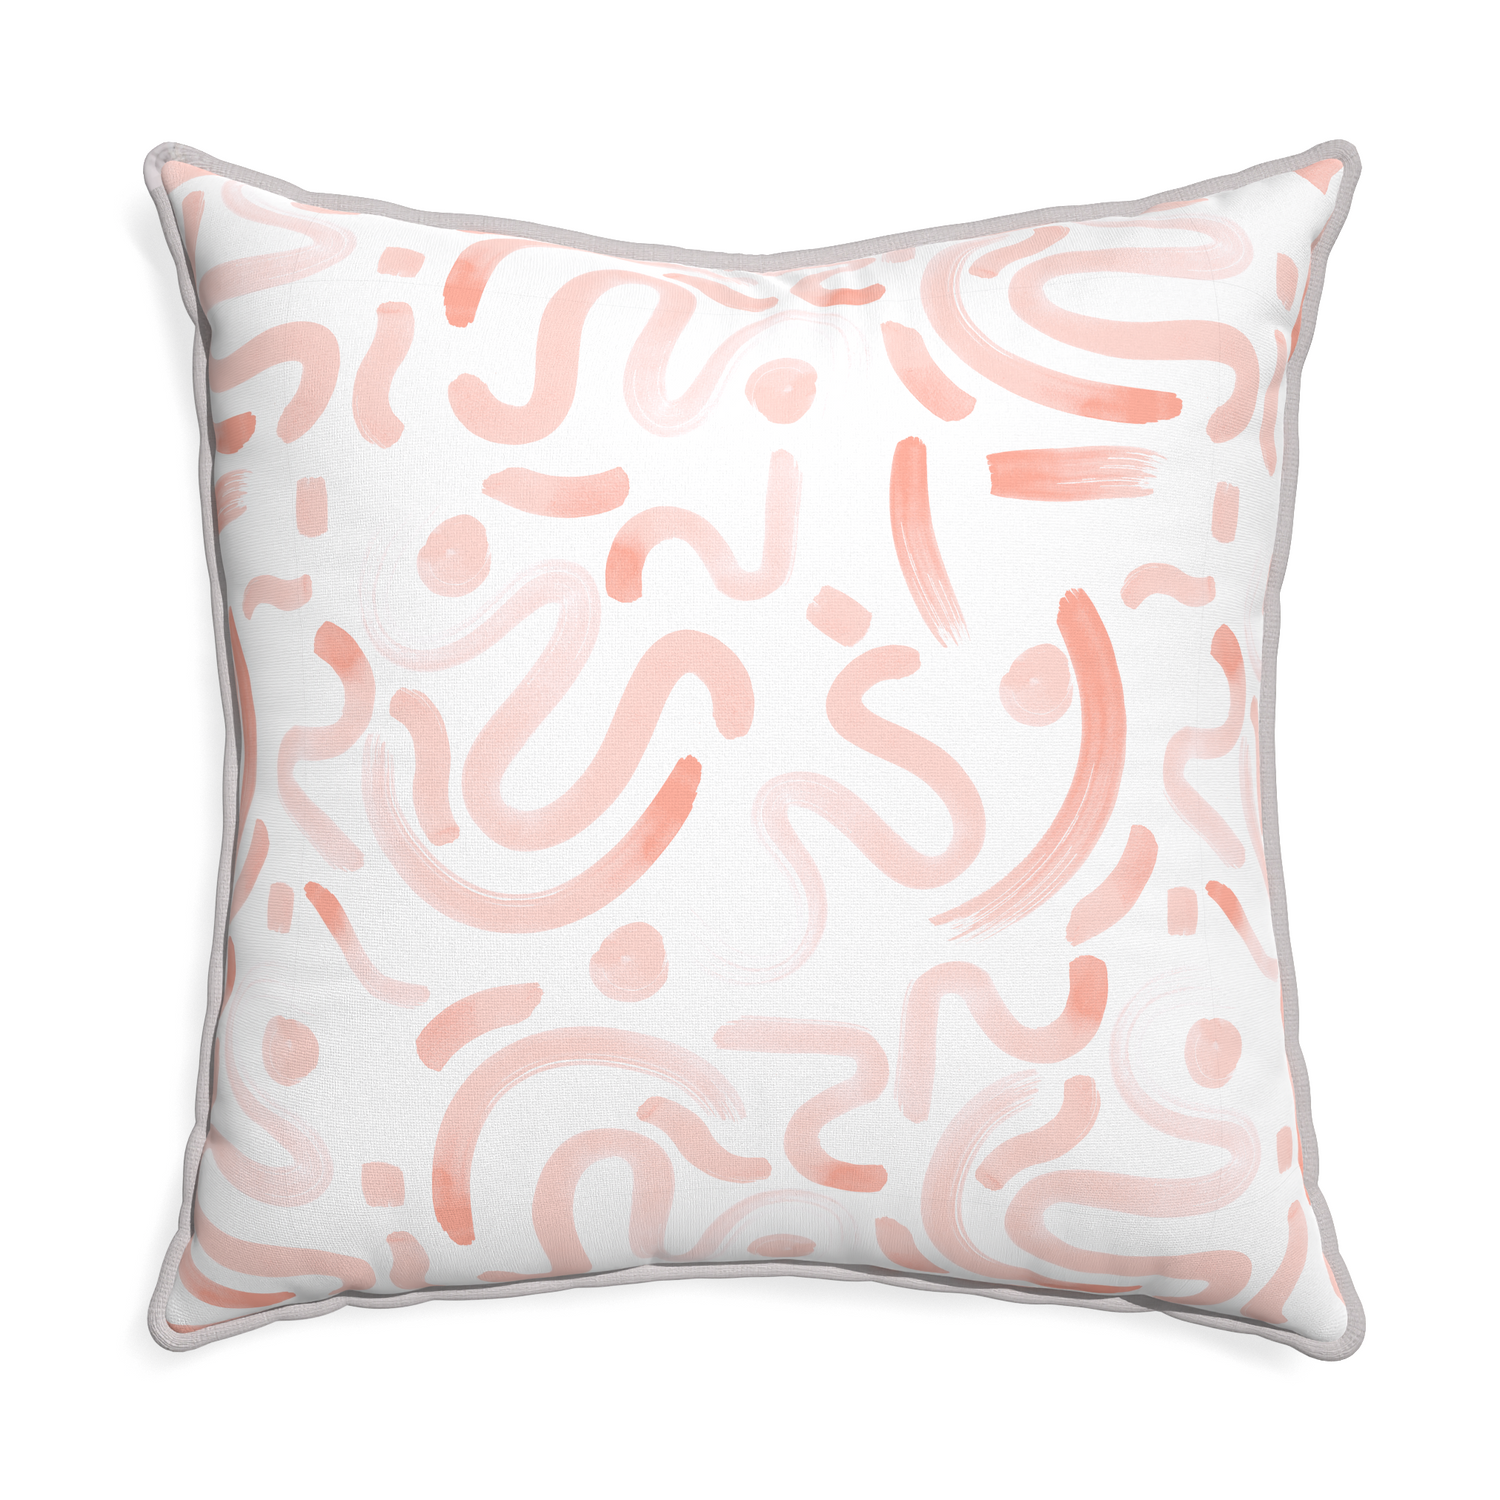 Euro-sham hockney pink custom pink graphicpillow with pebble piping on white background